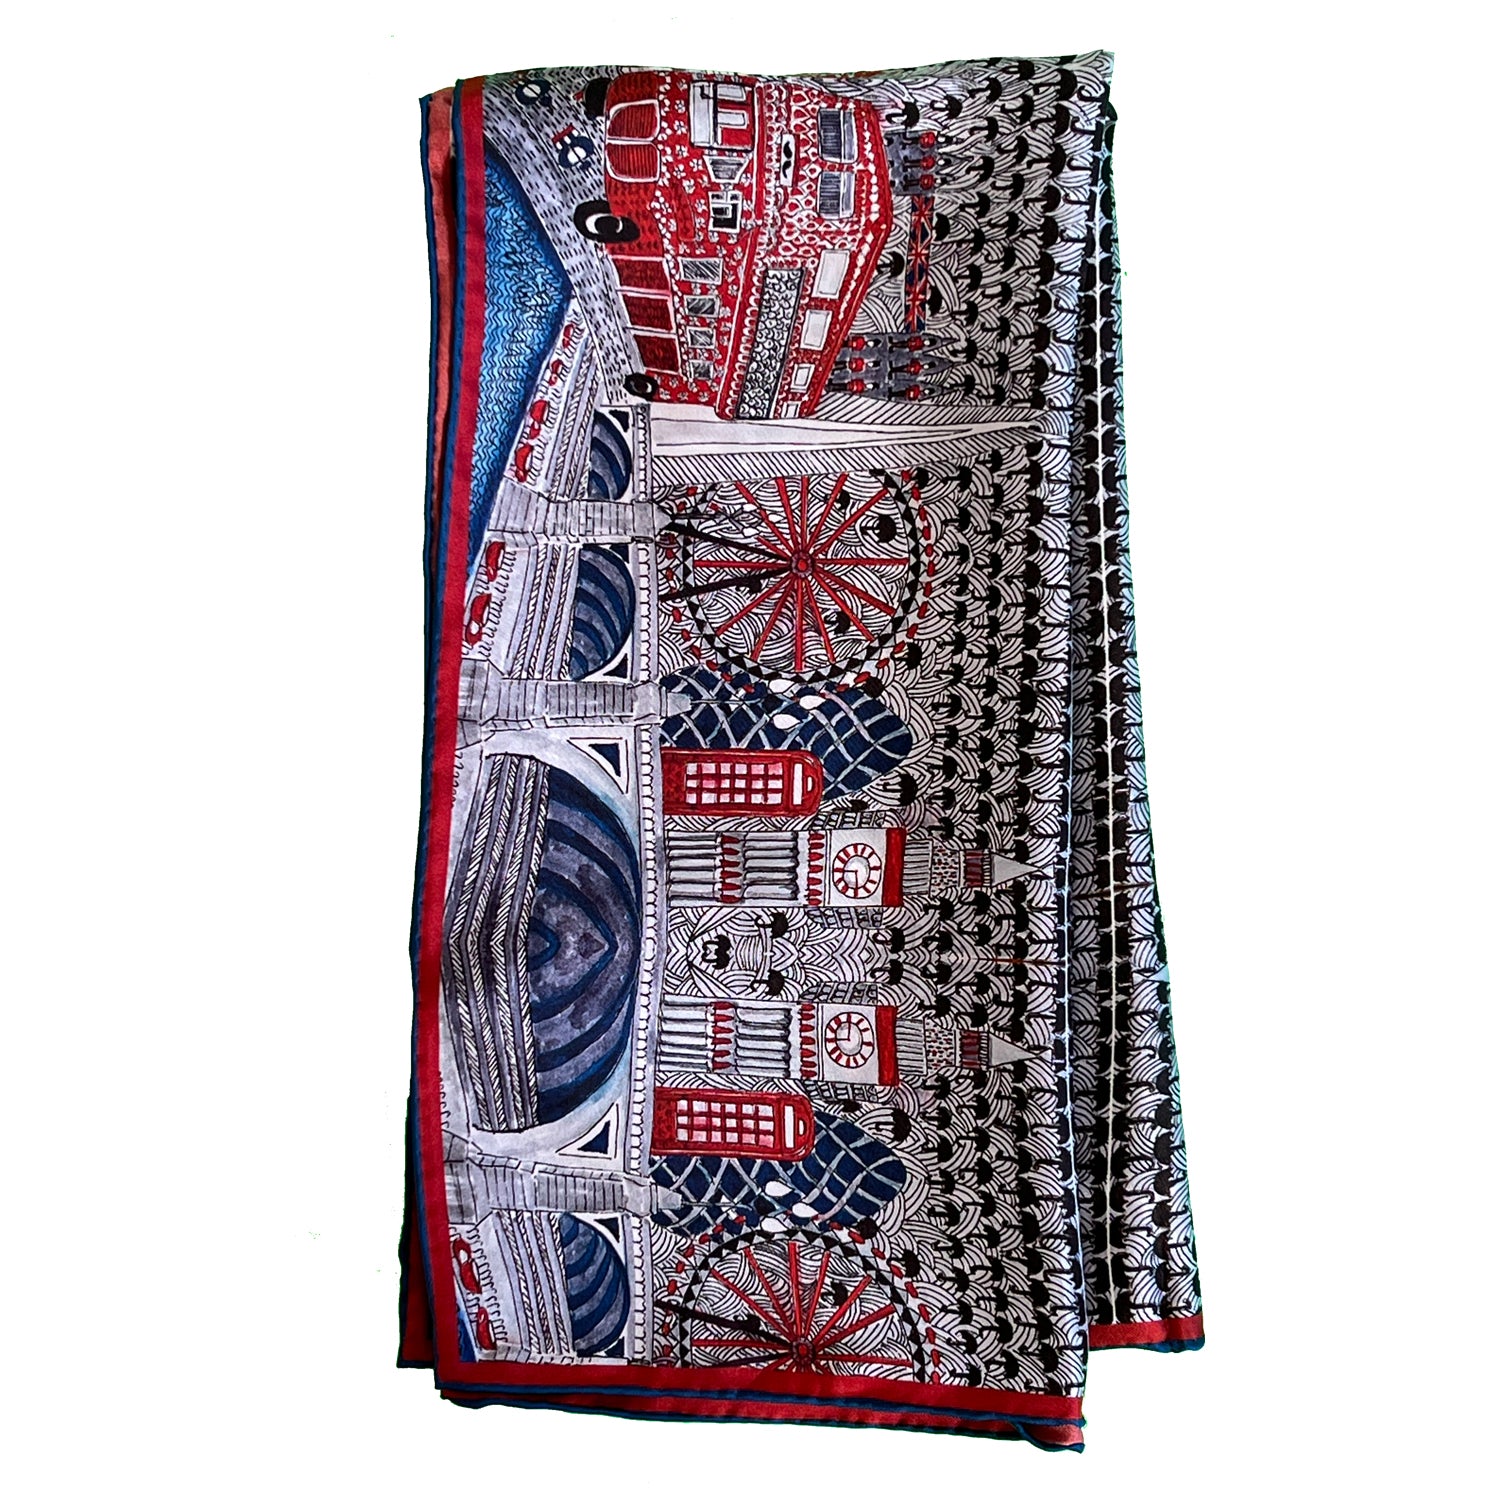 folded London scarf with cityscape details, hand painted, printed on silk